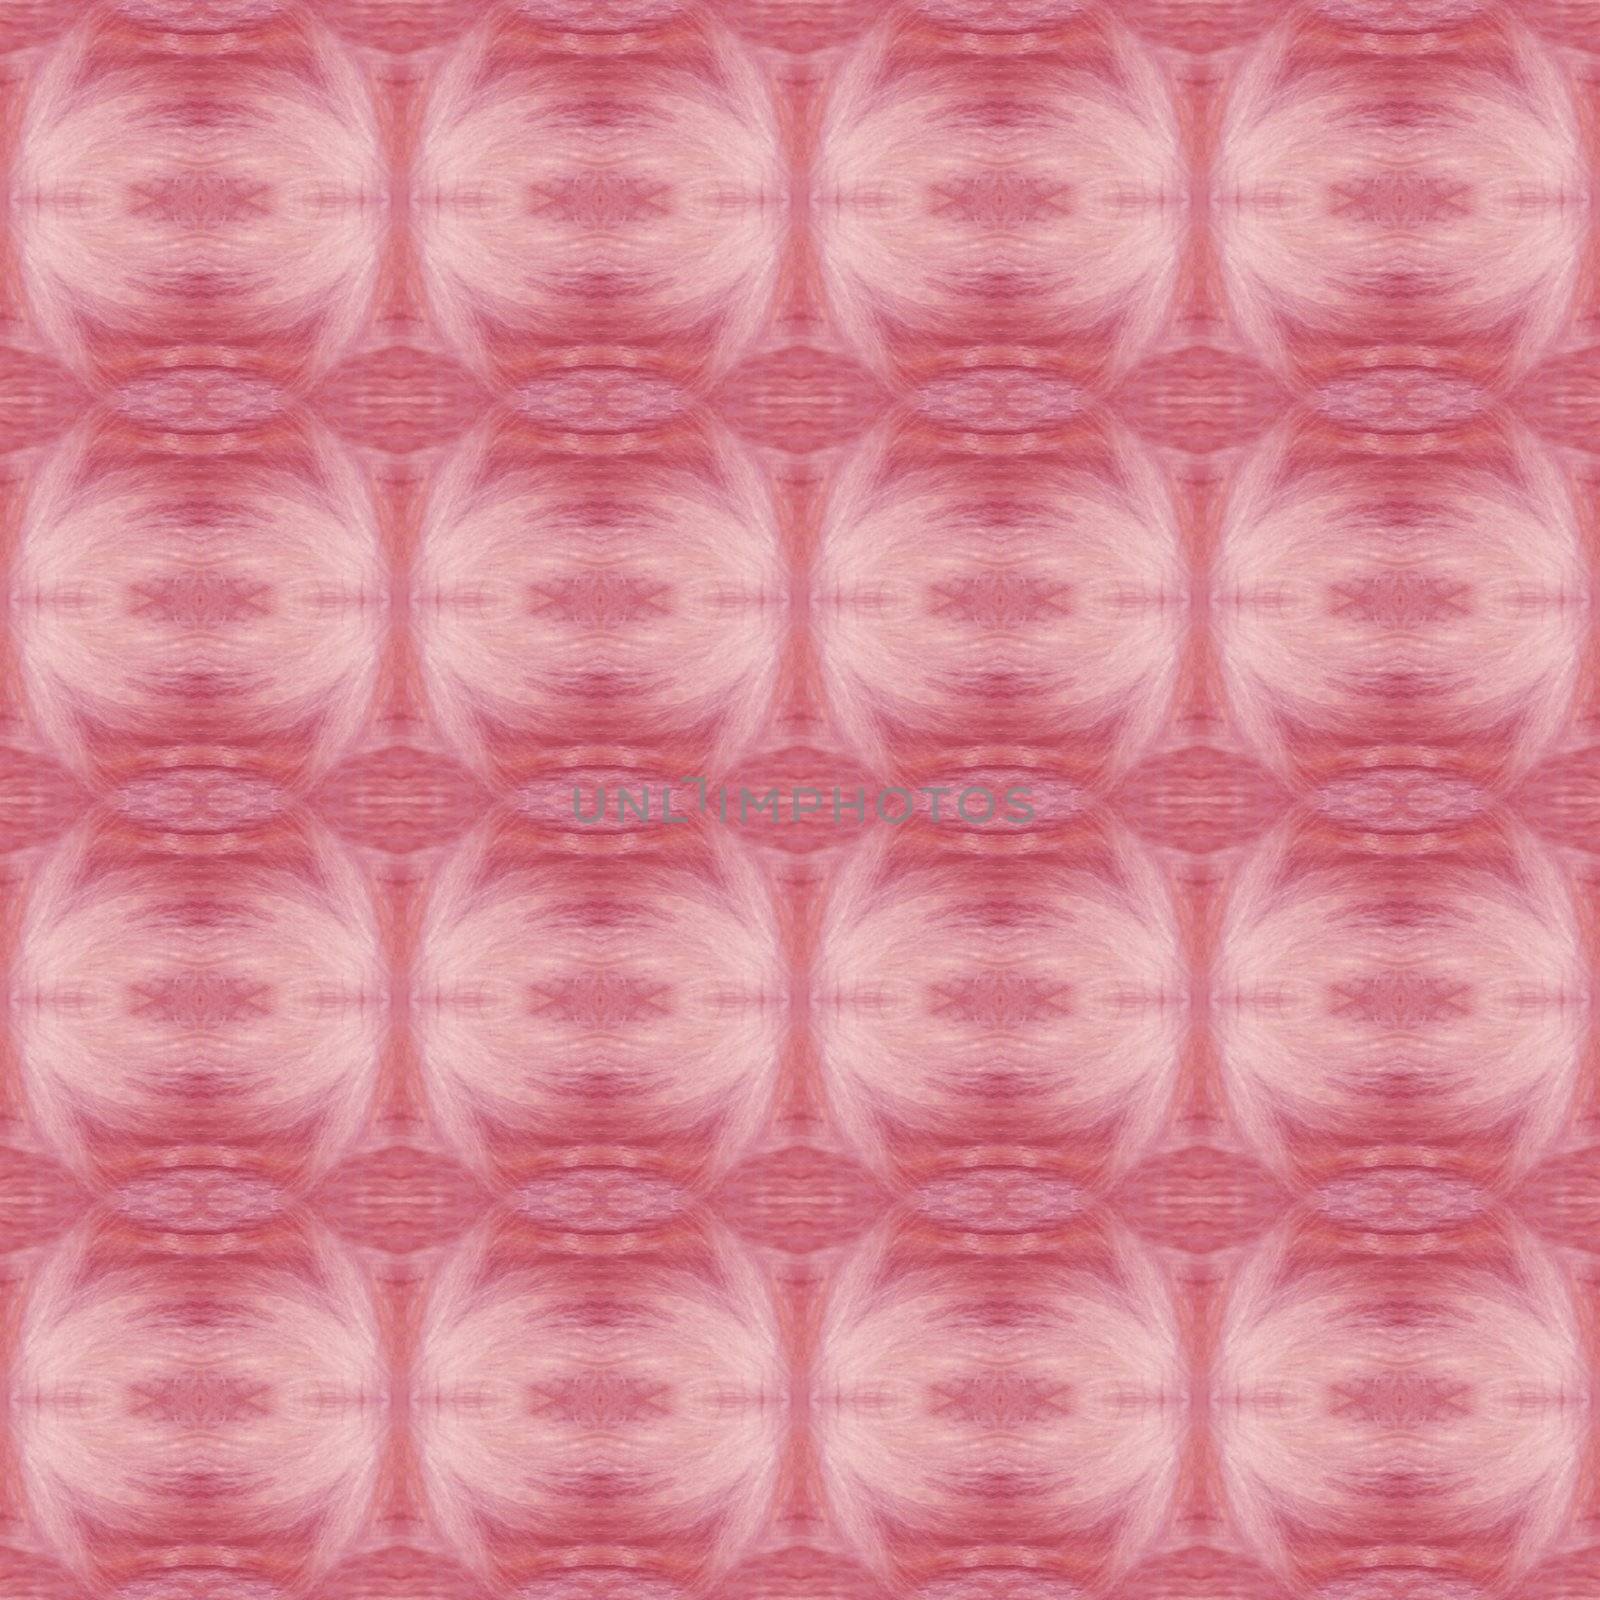 Pink tileable seamless border or background. Fur tiles retro texture with an old-fashioned twist